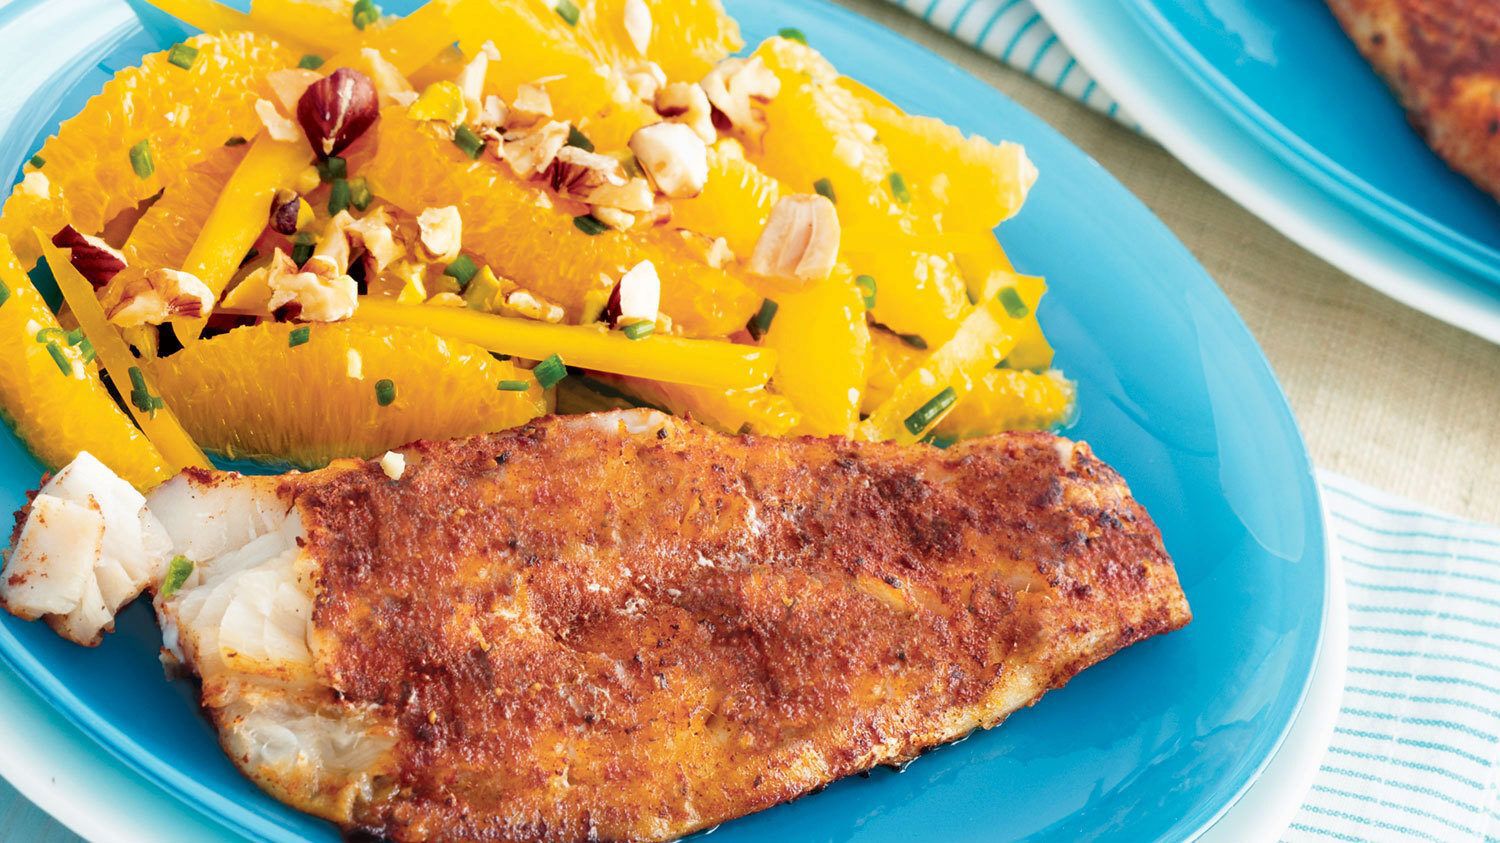 Spiced-Cod-with-Orange-_-Pepper-Salad-cropped